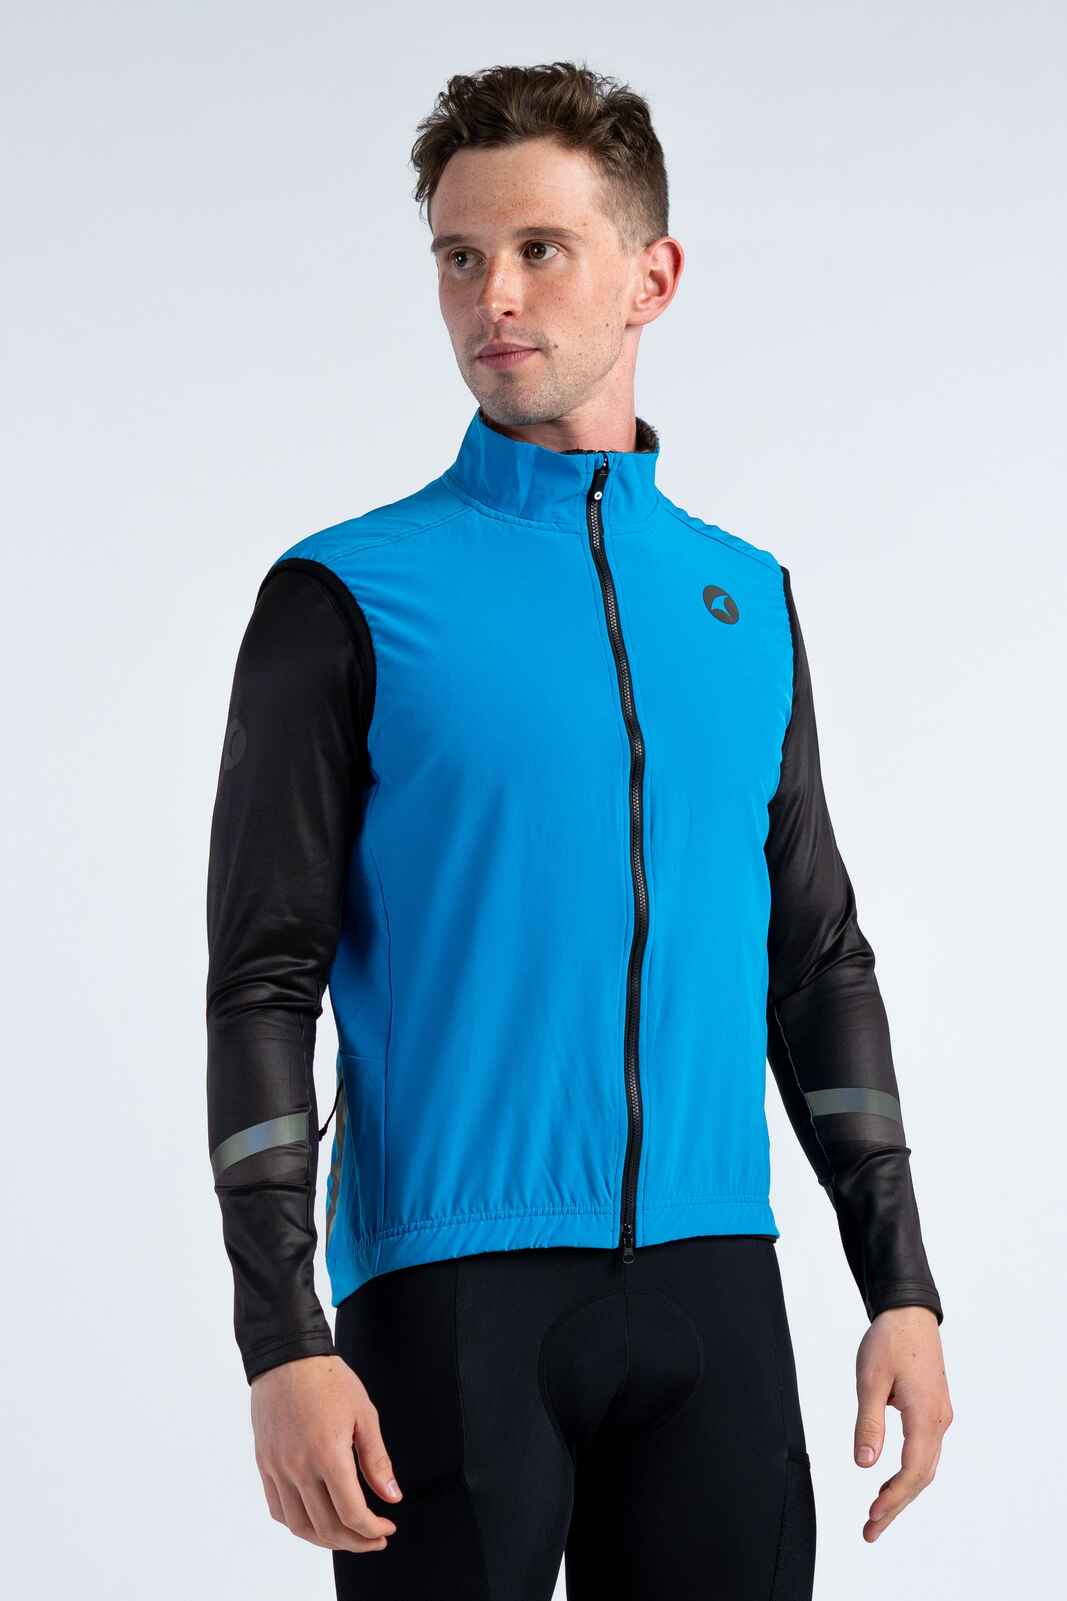 Men's Blue Thermal Cycling Vest - Front View